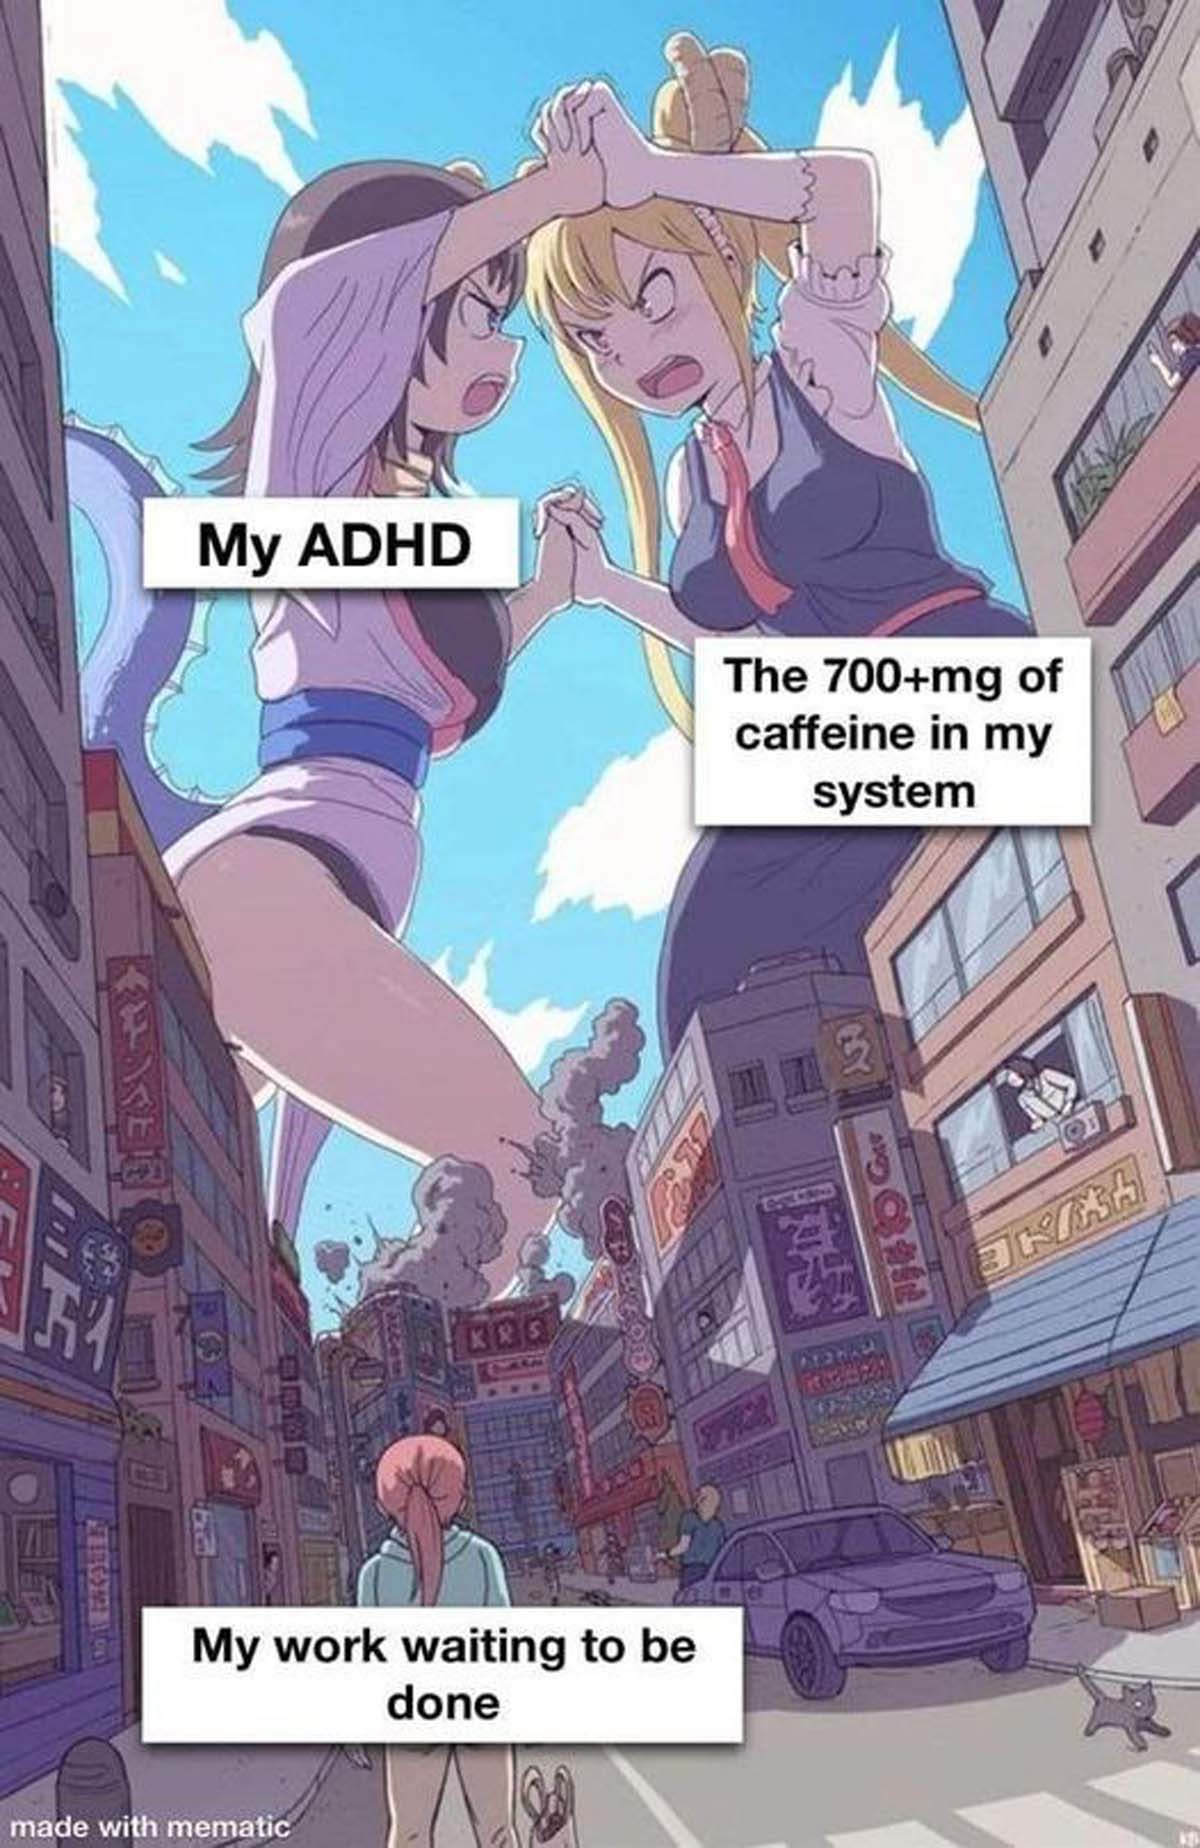 giantess tohru - My Adhd The 700mg of caffeine in my system Krs My work waiting to be done made with mematic Cine